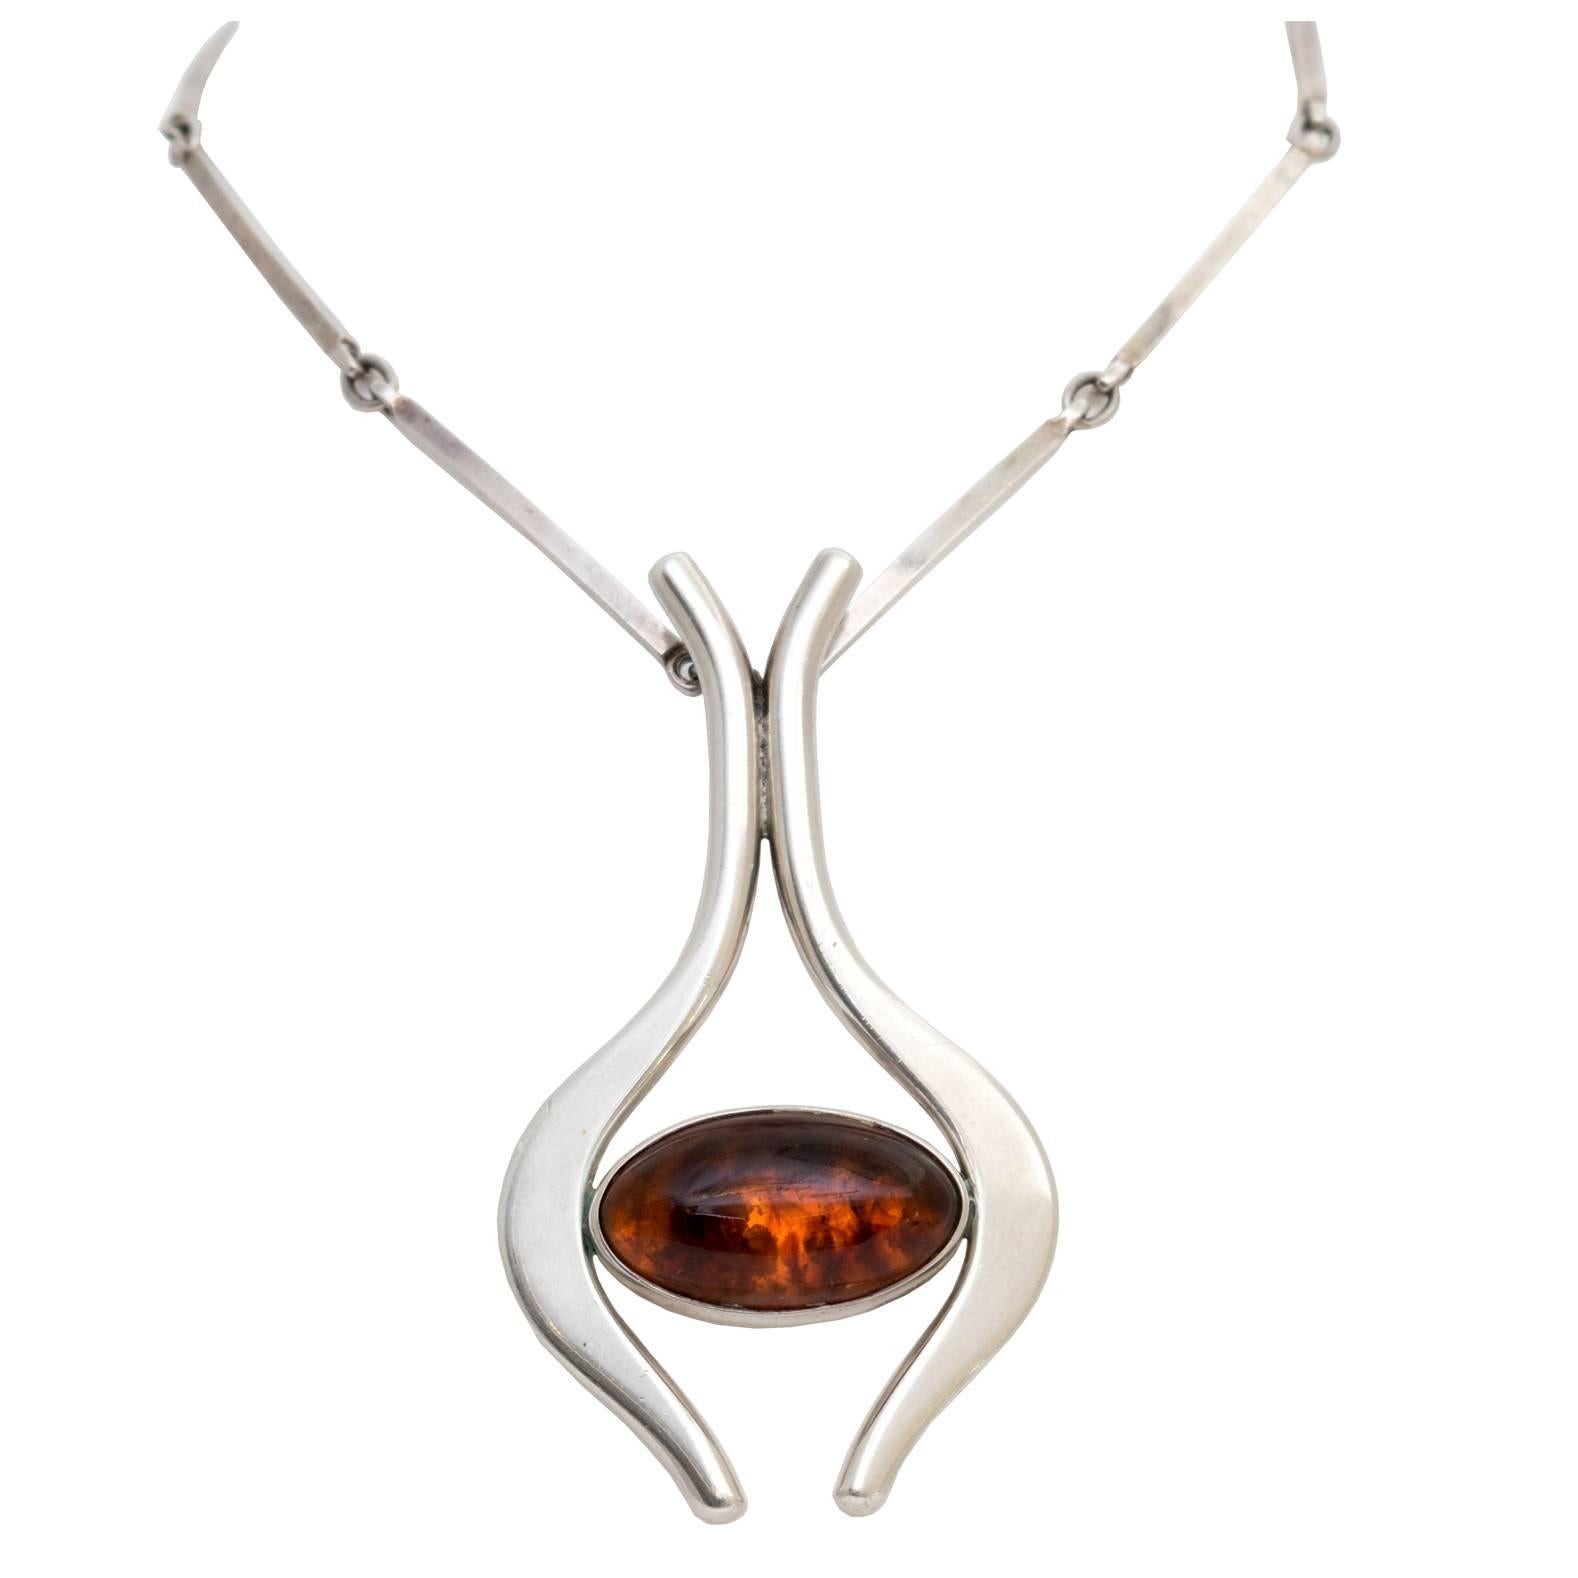 Scandinavian Modern Silver and Amber Necklace by Niels Erik From, Denmark For Sale